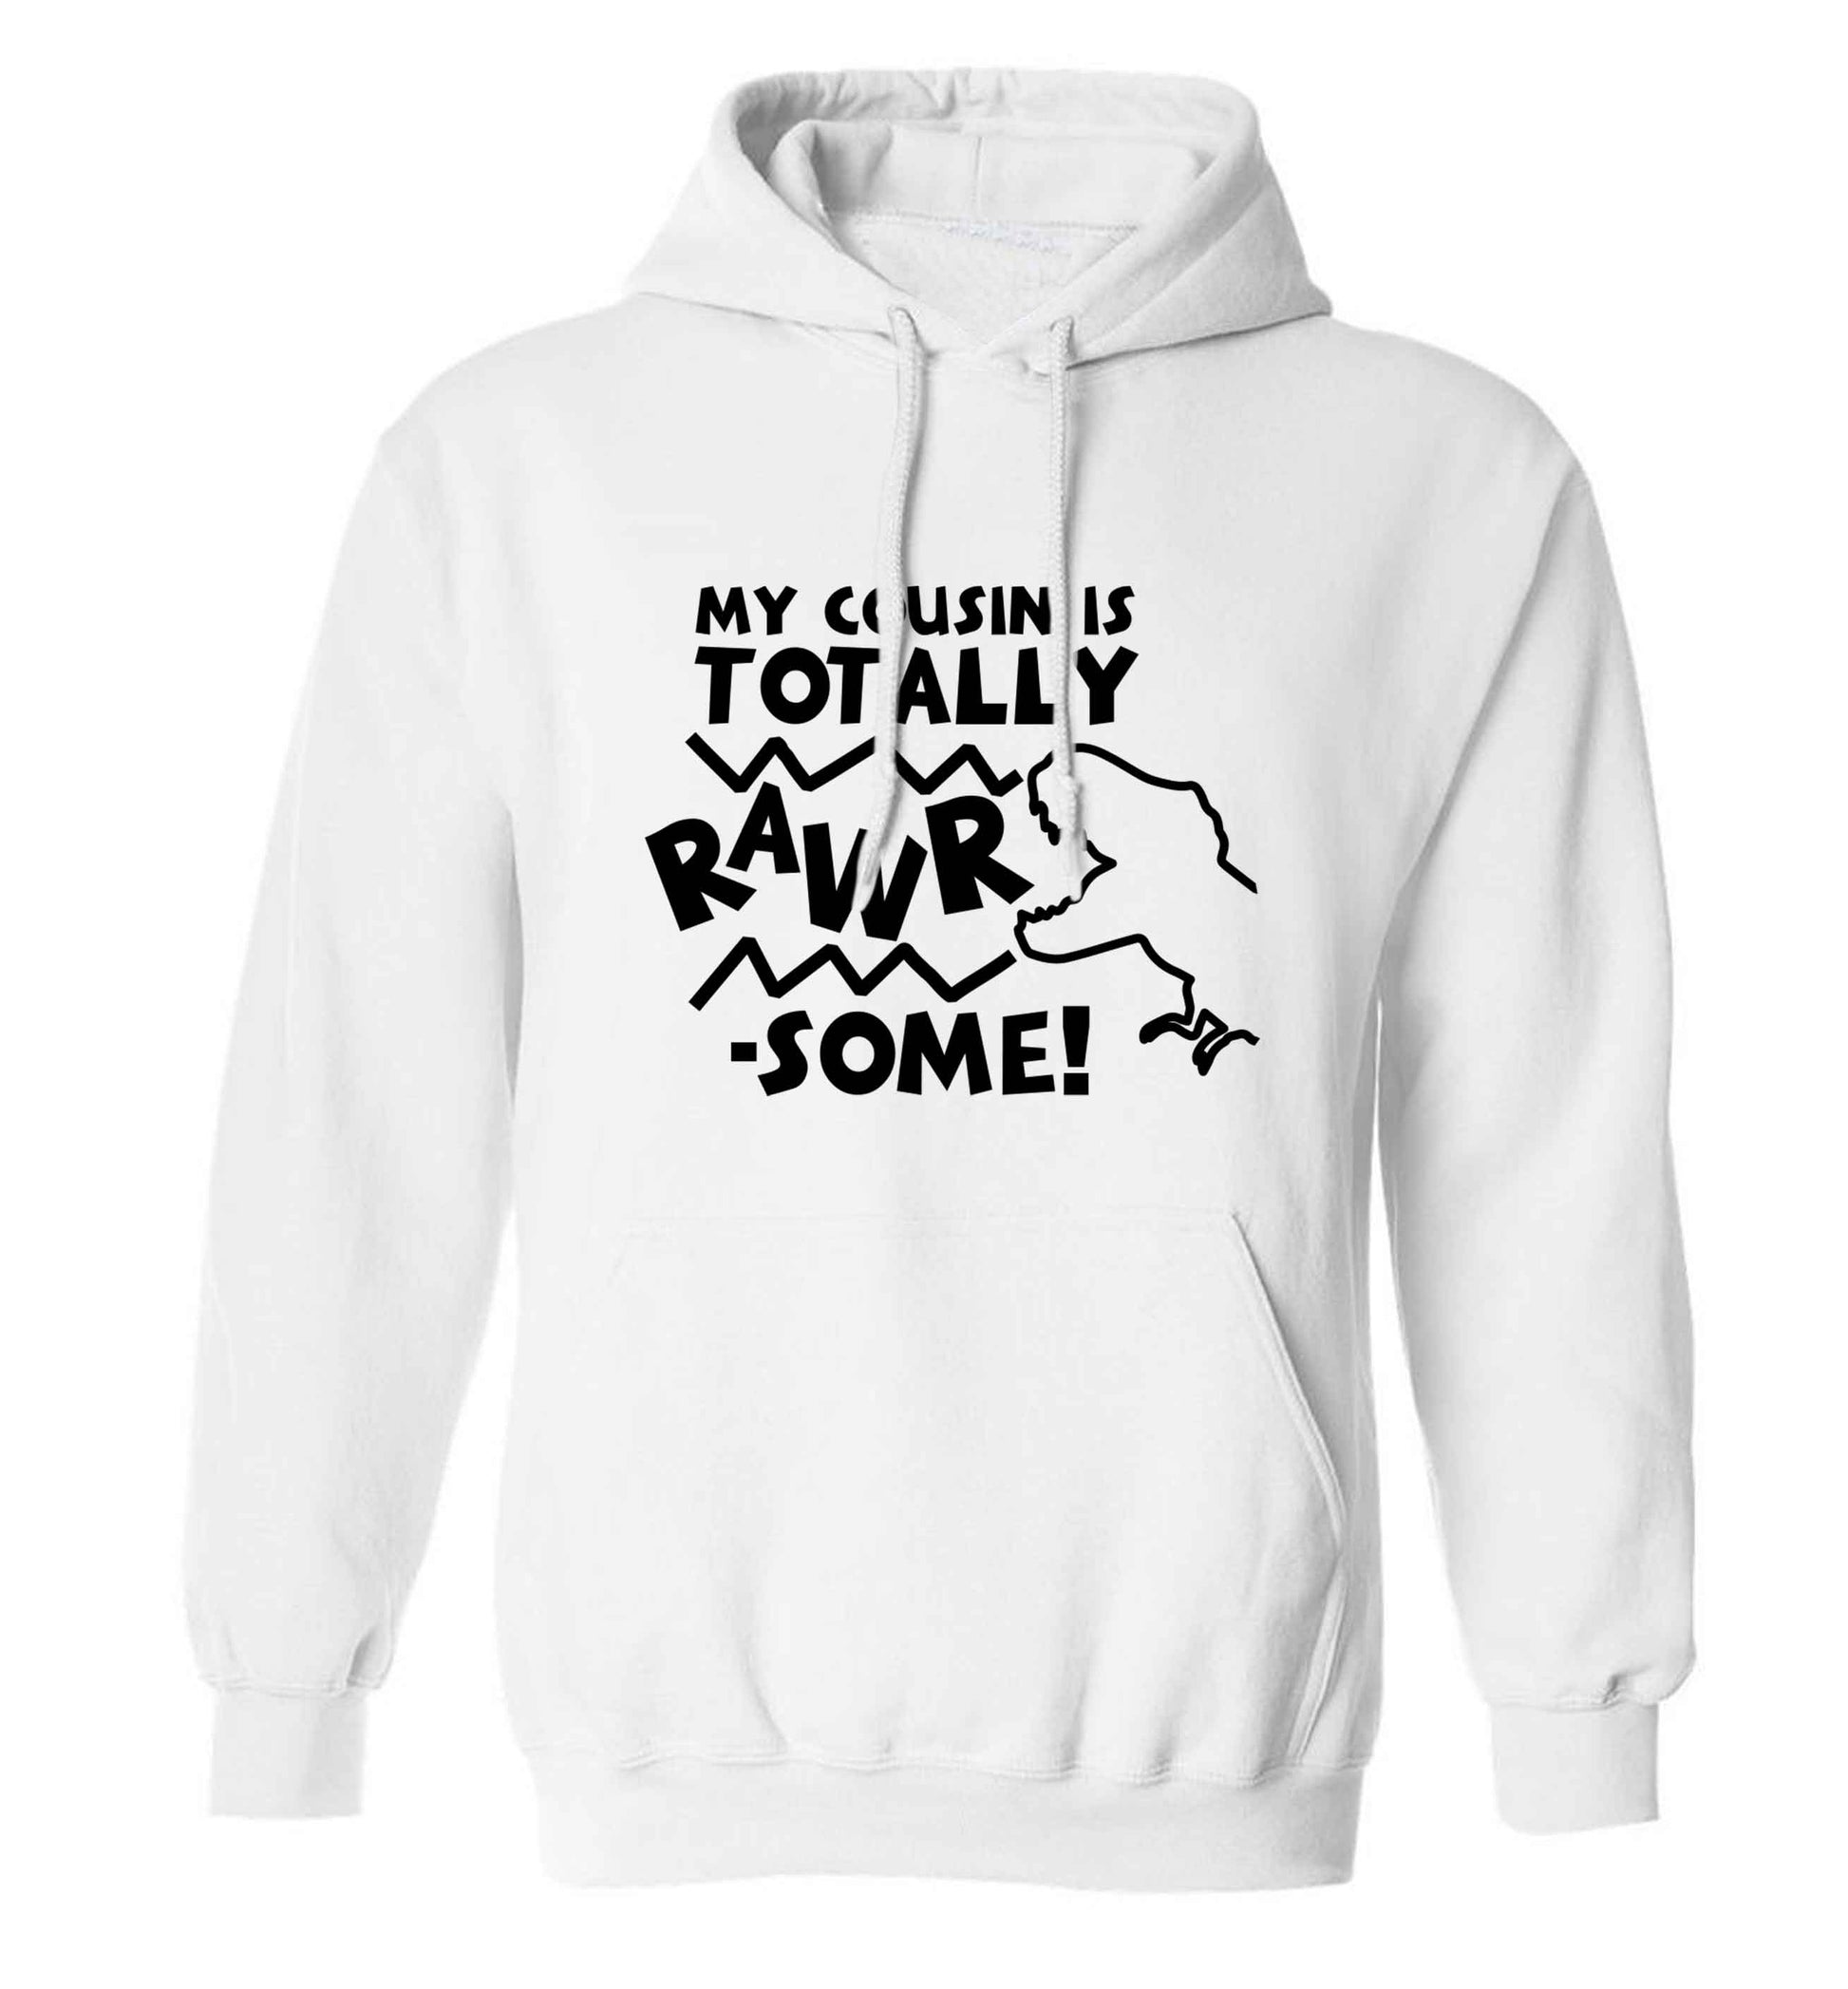 My cousin is totally rawrsome adults unisex white hoodie 2XL